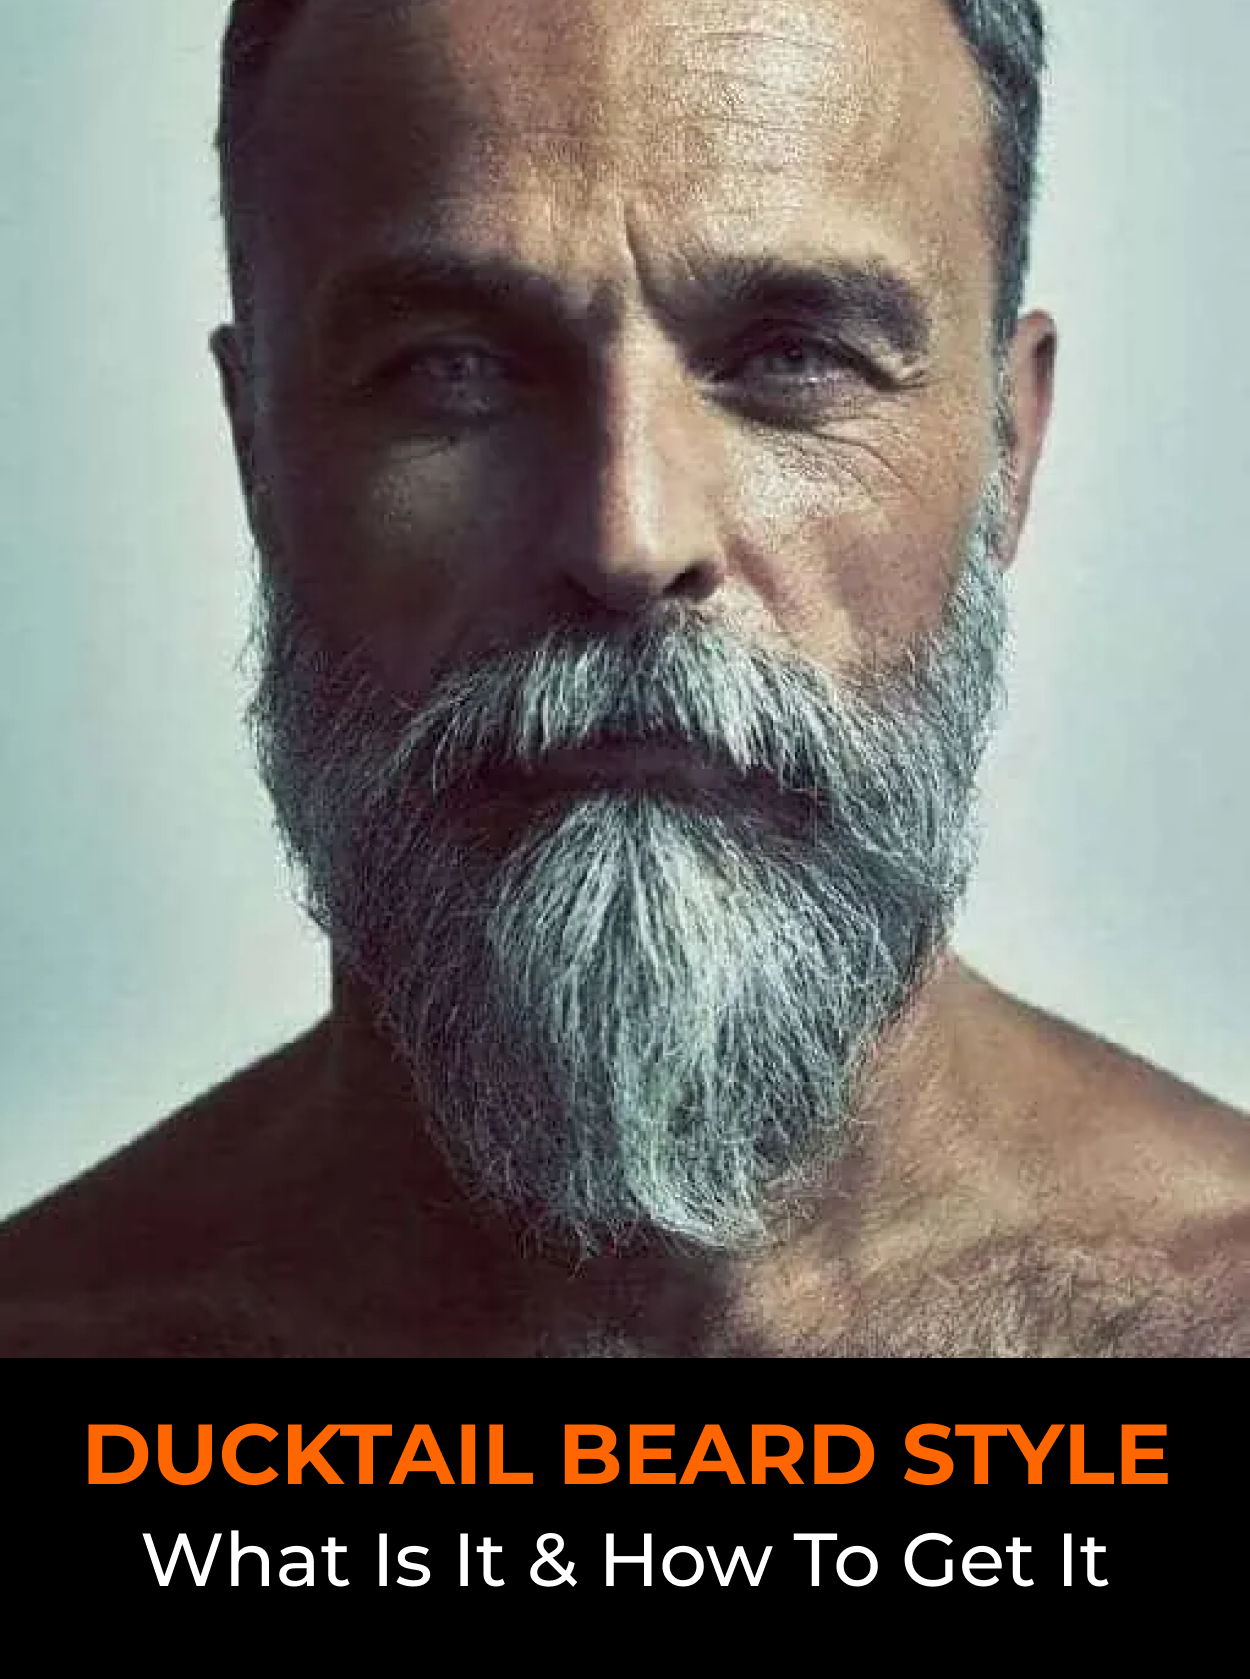 ducktail beard style, what is it and how to get it